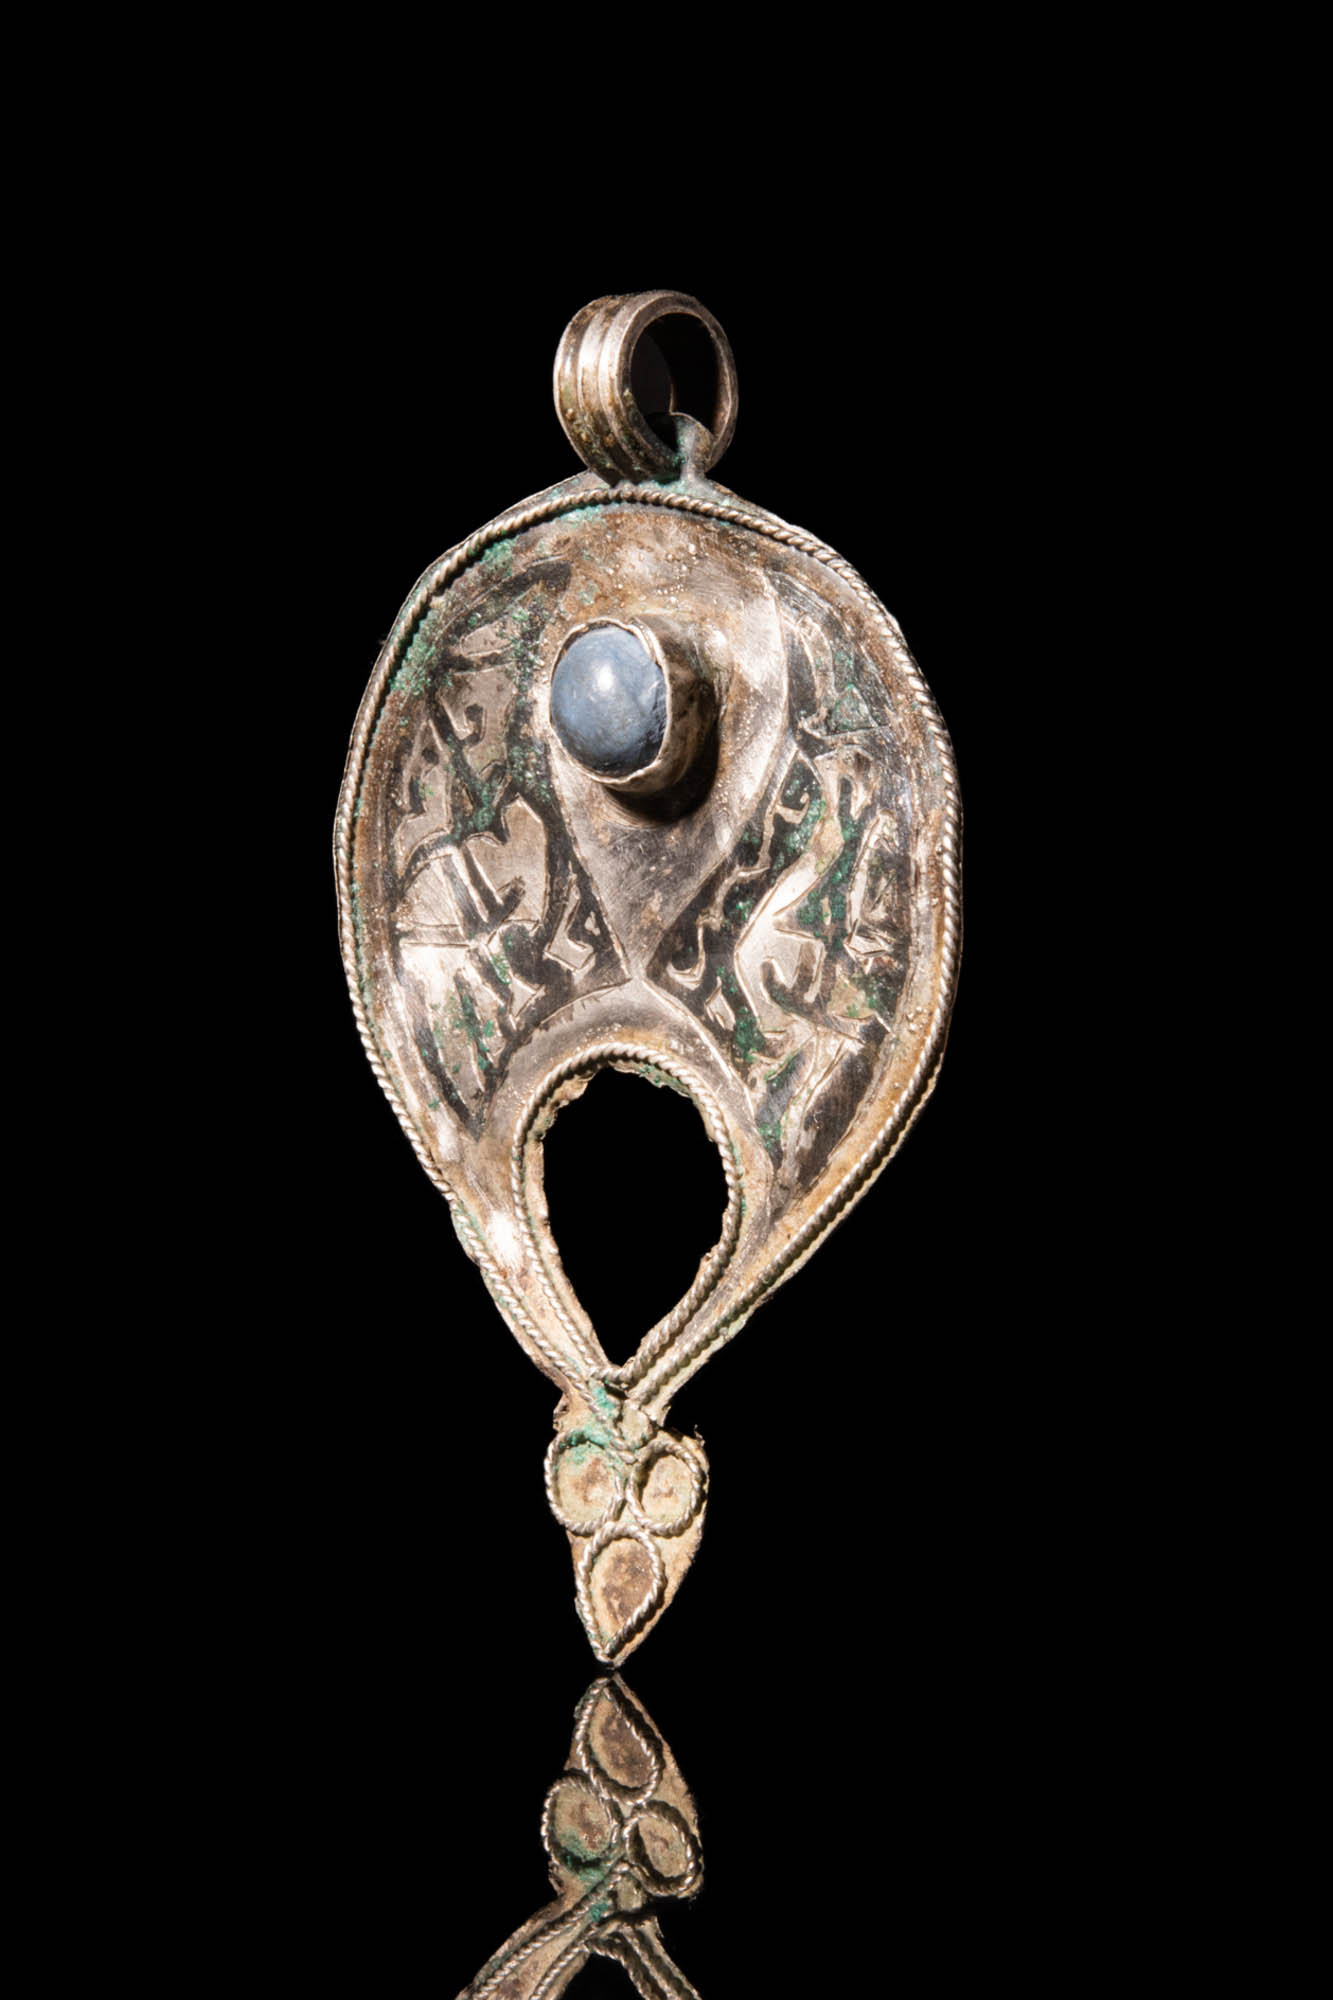 FATIMID CRESCENT MOON PENDANT WITH BLUE BEAD - Image 2 of 3